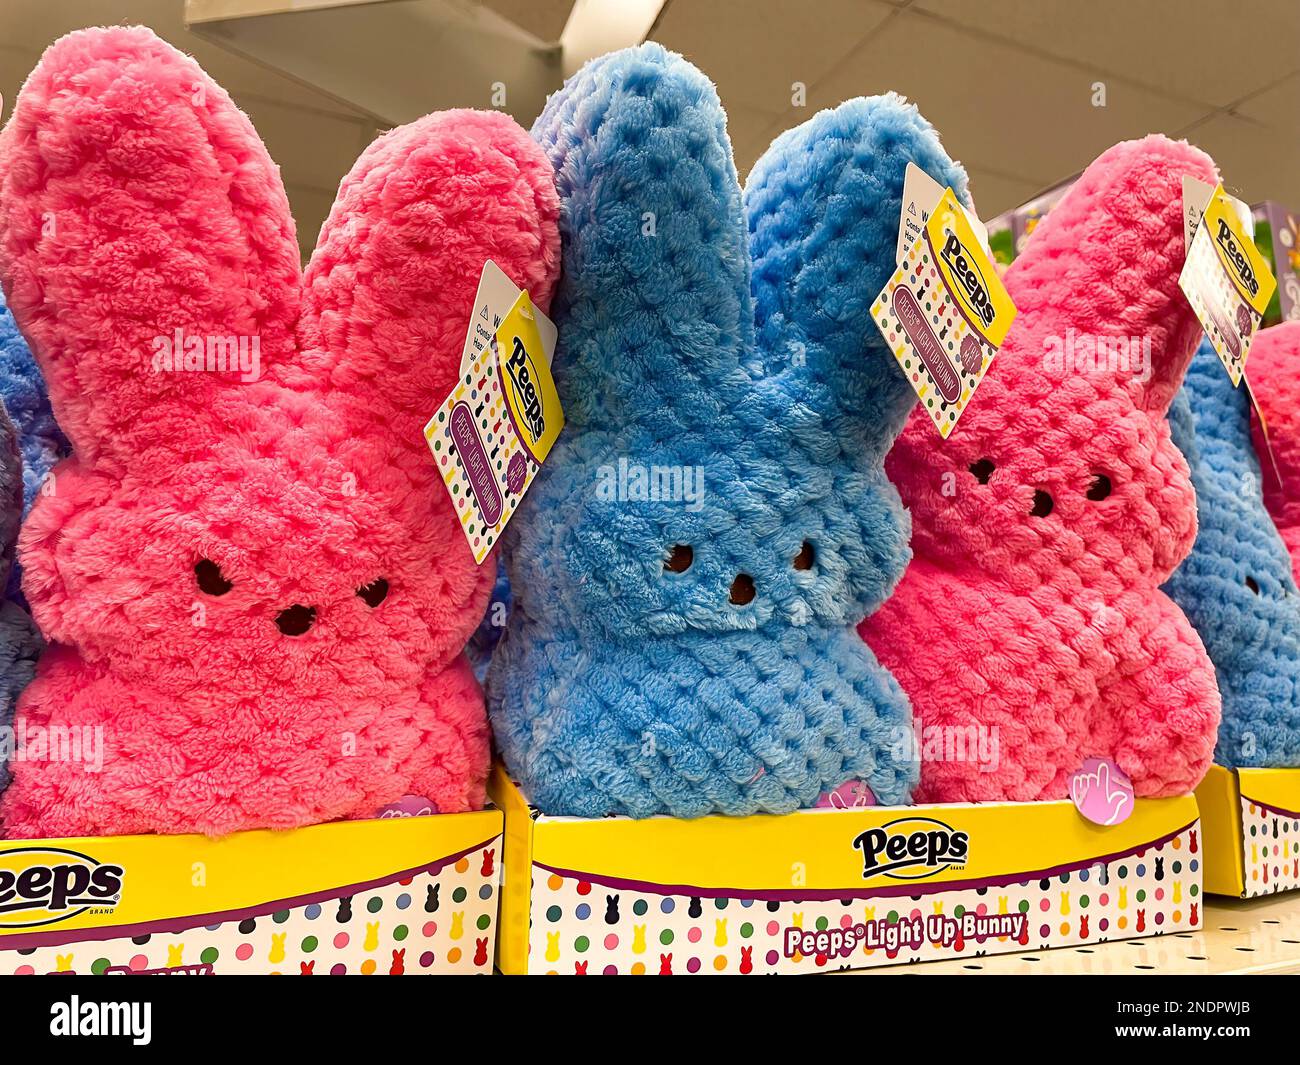 https://c8.alamy.com/comp/2NDPWJB/suffern-ny-usa-feb-4-2023-landscape-image-of-pink-and-blue-peeps-light-up-bunnies-lined-up-on-a-drugstore-shelf-for-the-easter-holiday-2NDPWJB.jpg